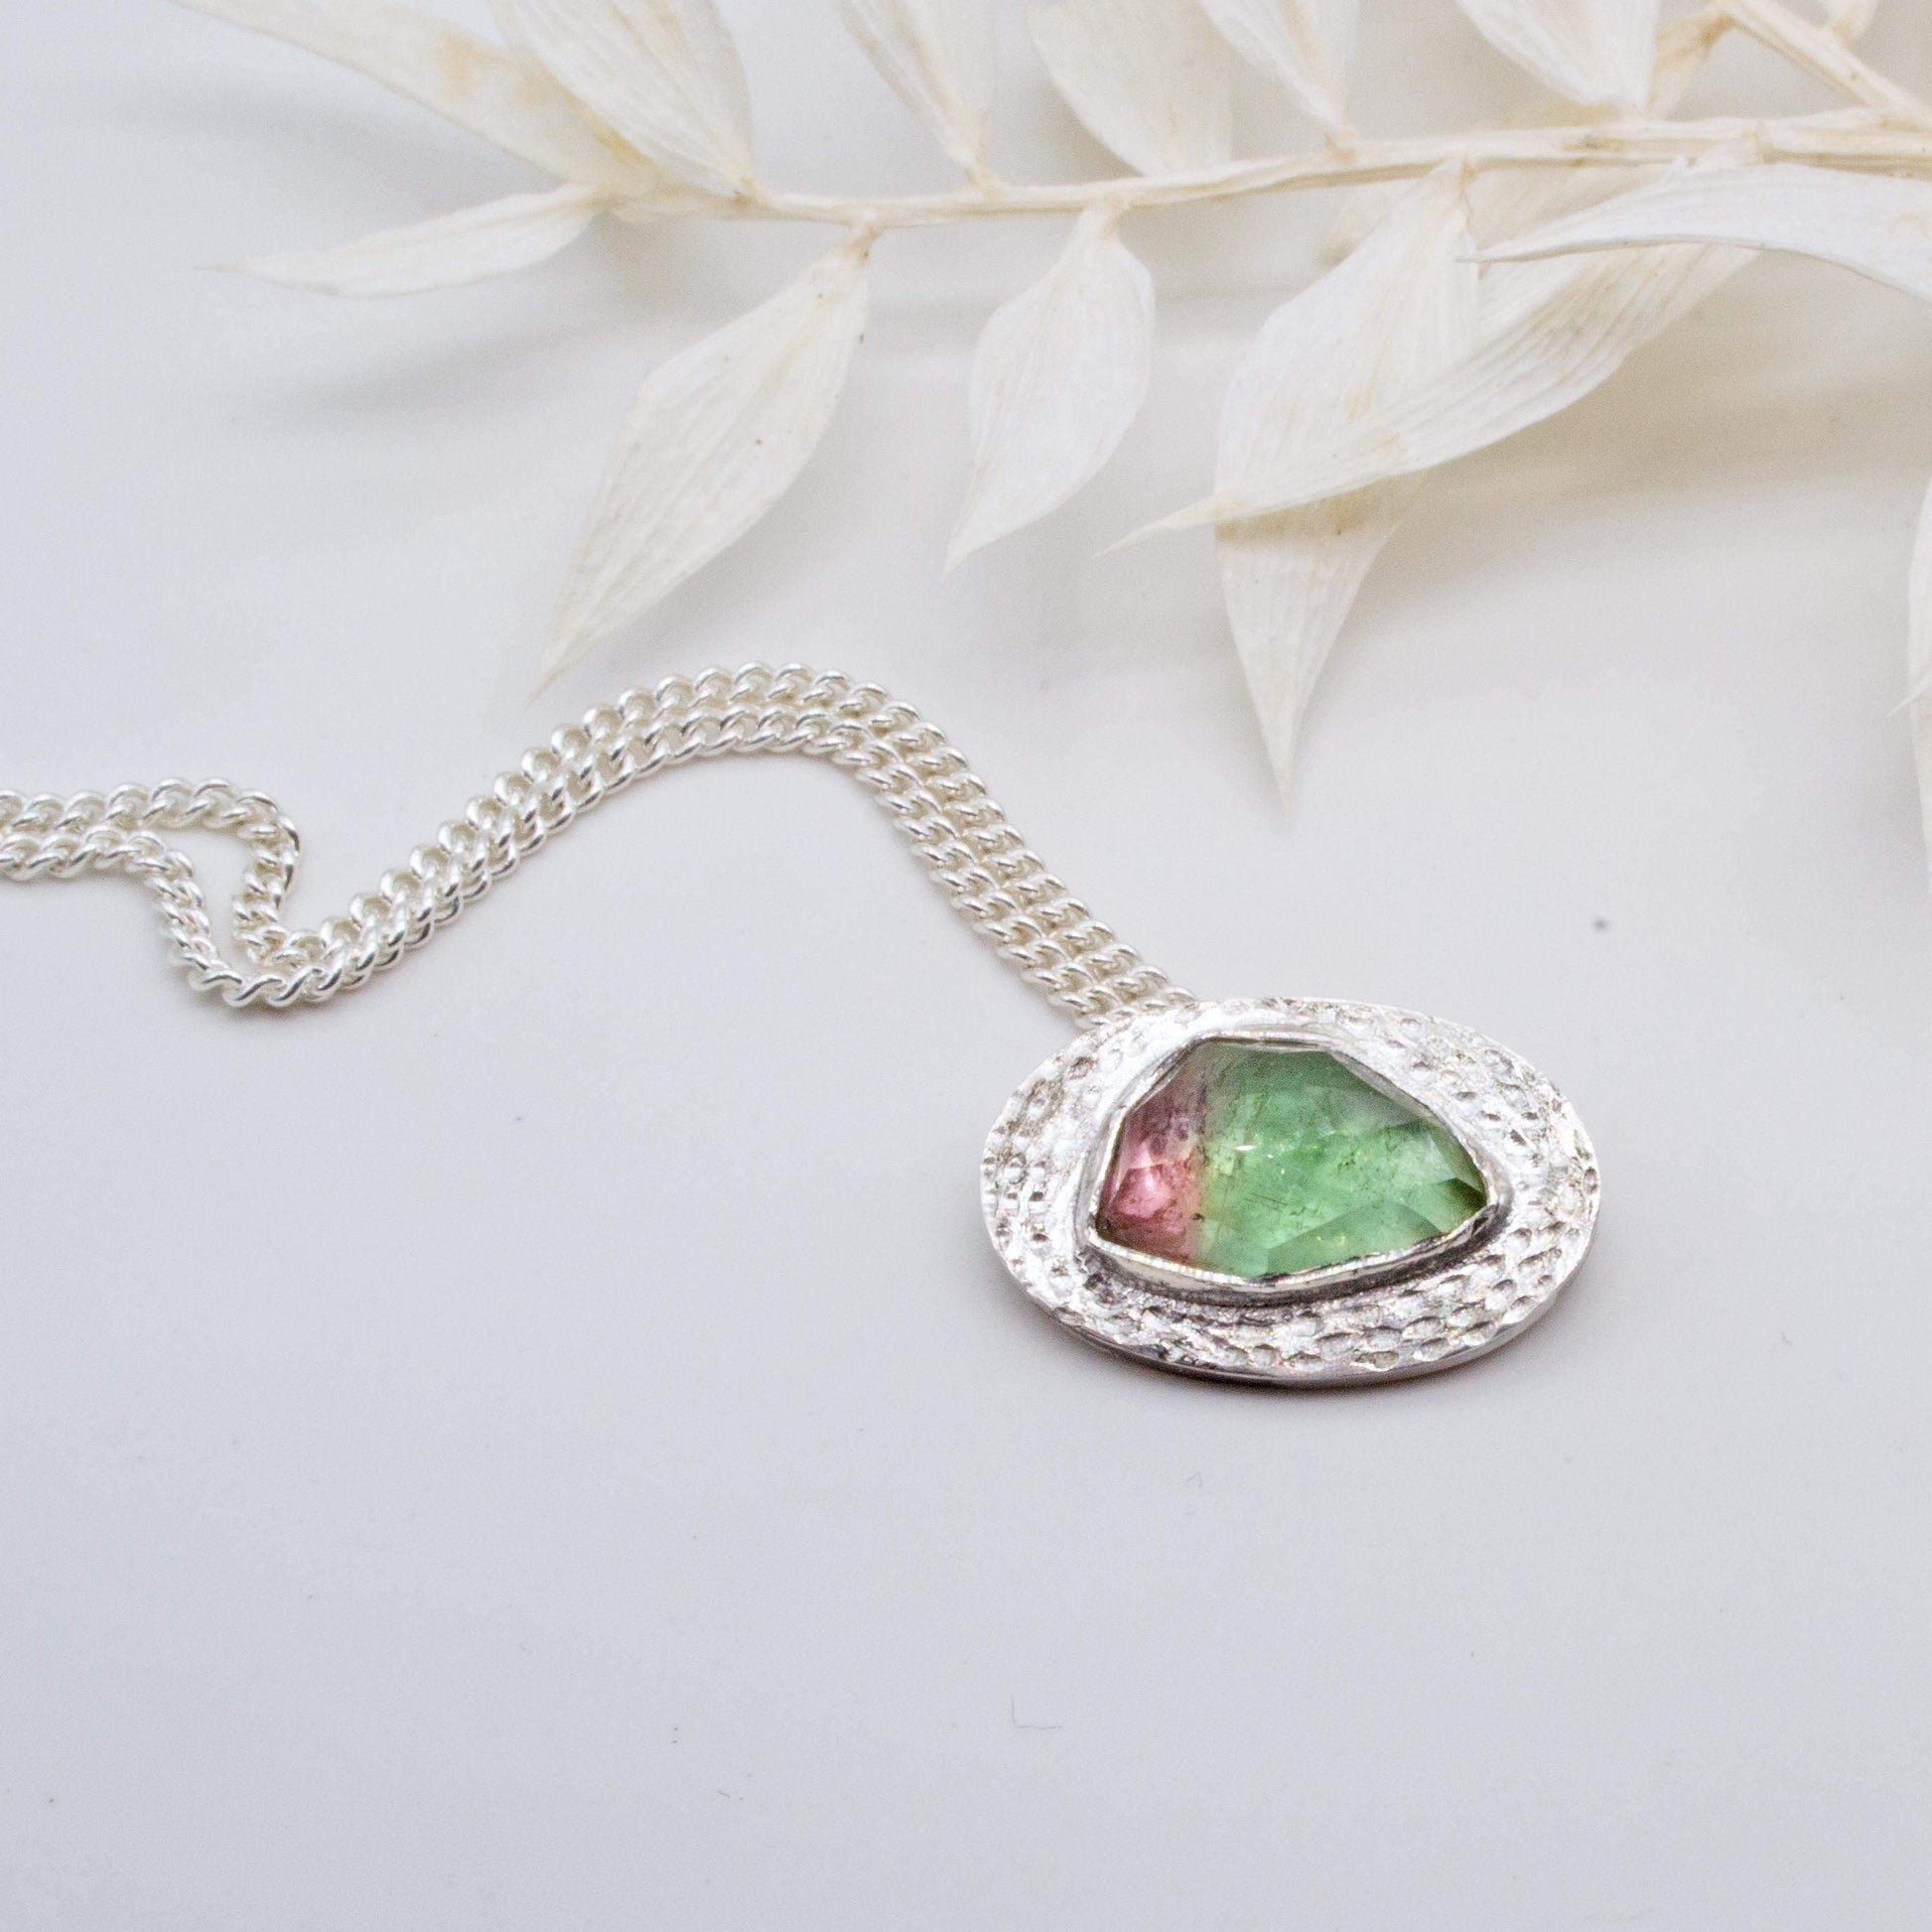 Becky Pearce Designs Tourmaline - green and pink - silver pendant